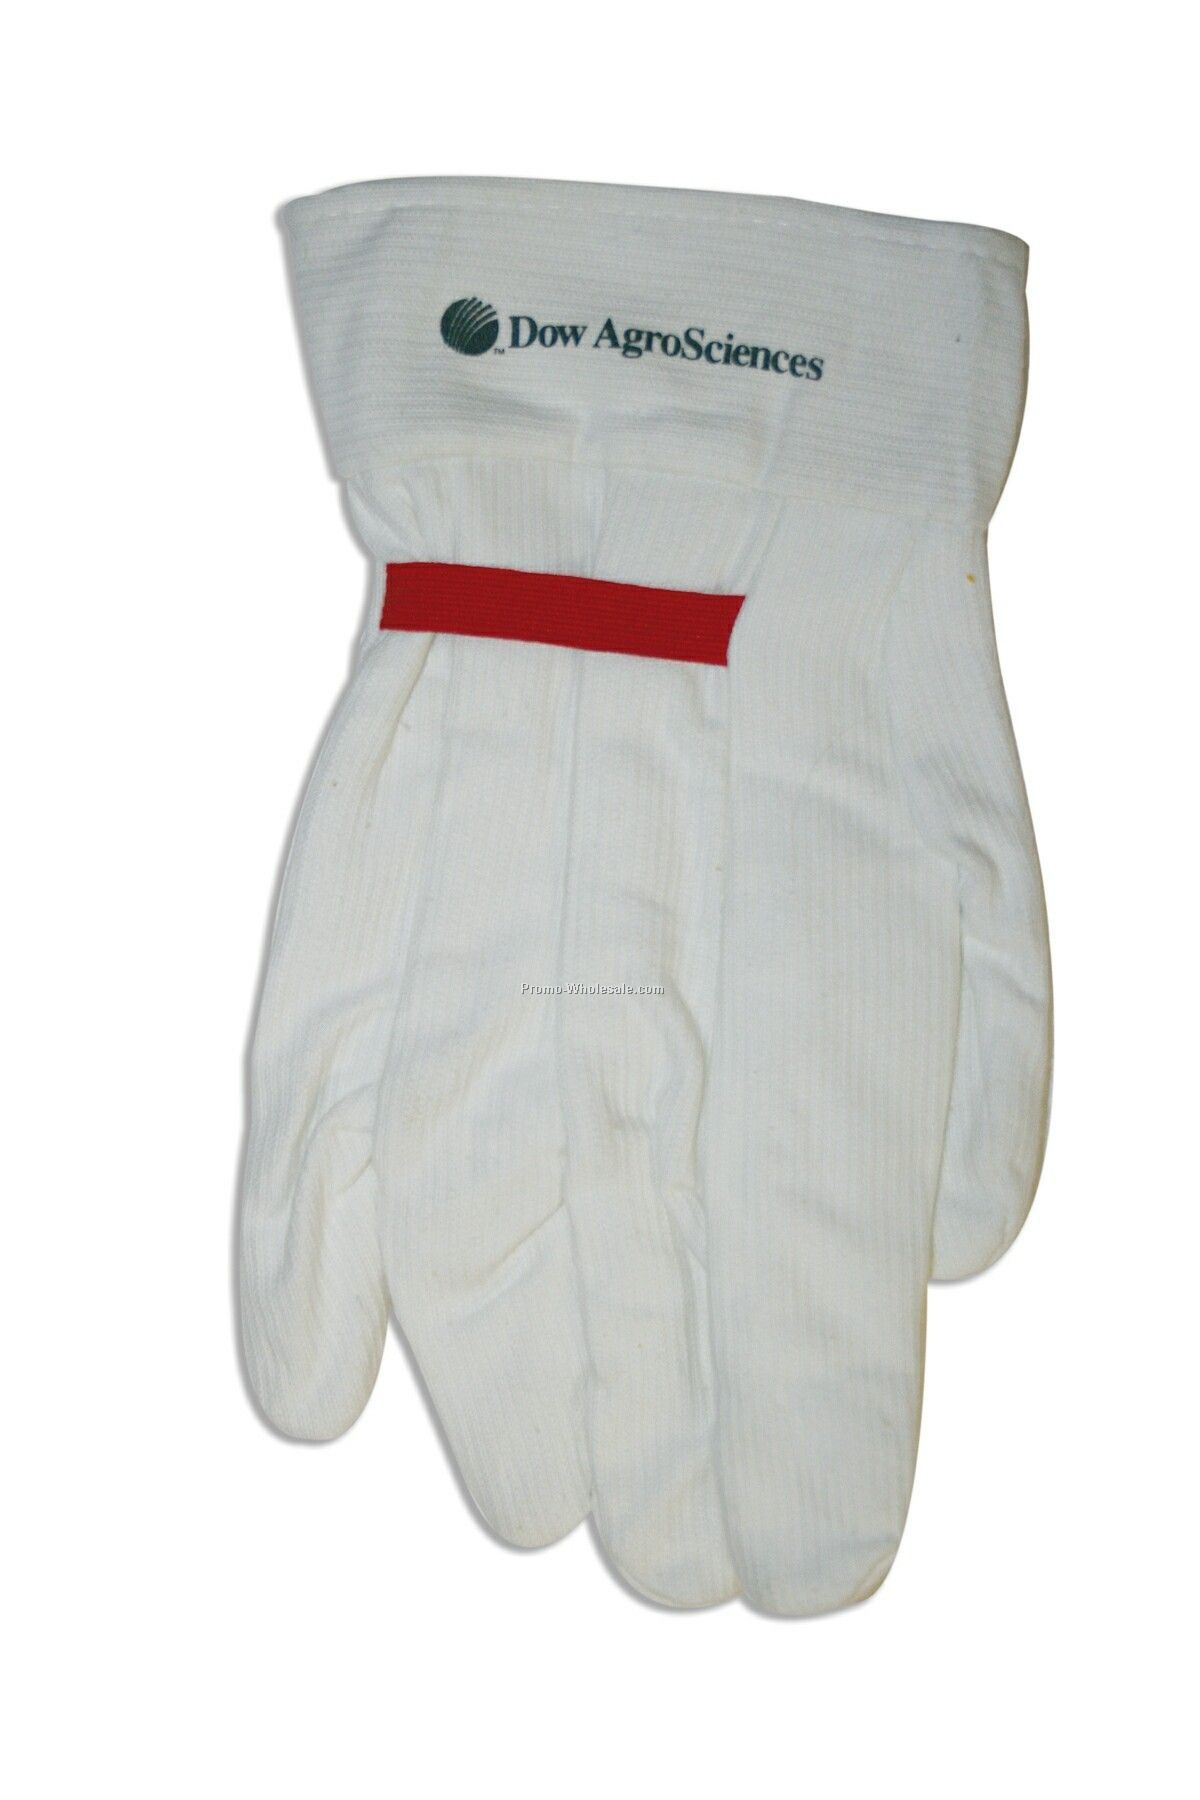 Bleached Corded Glove With Red Elastic Strap (One Size)